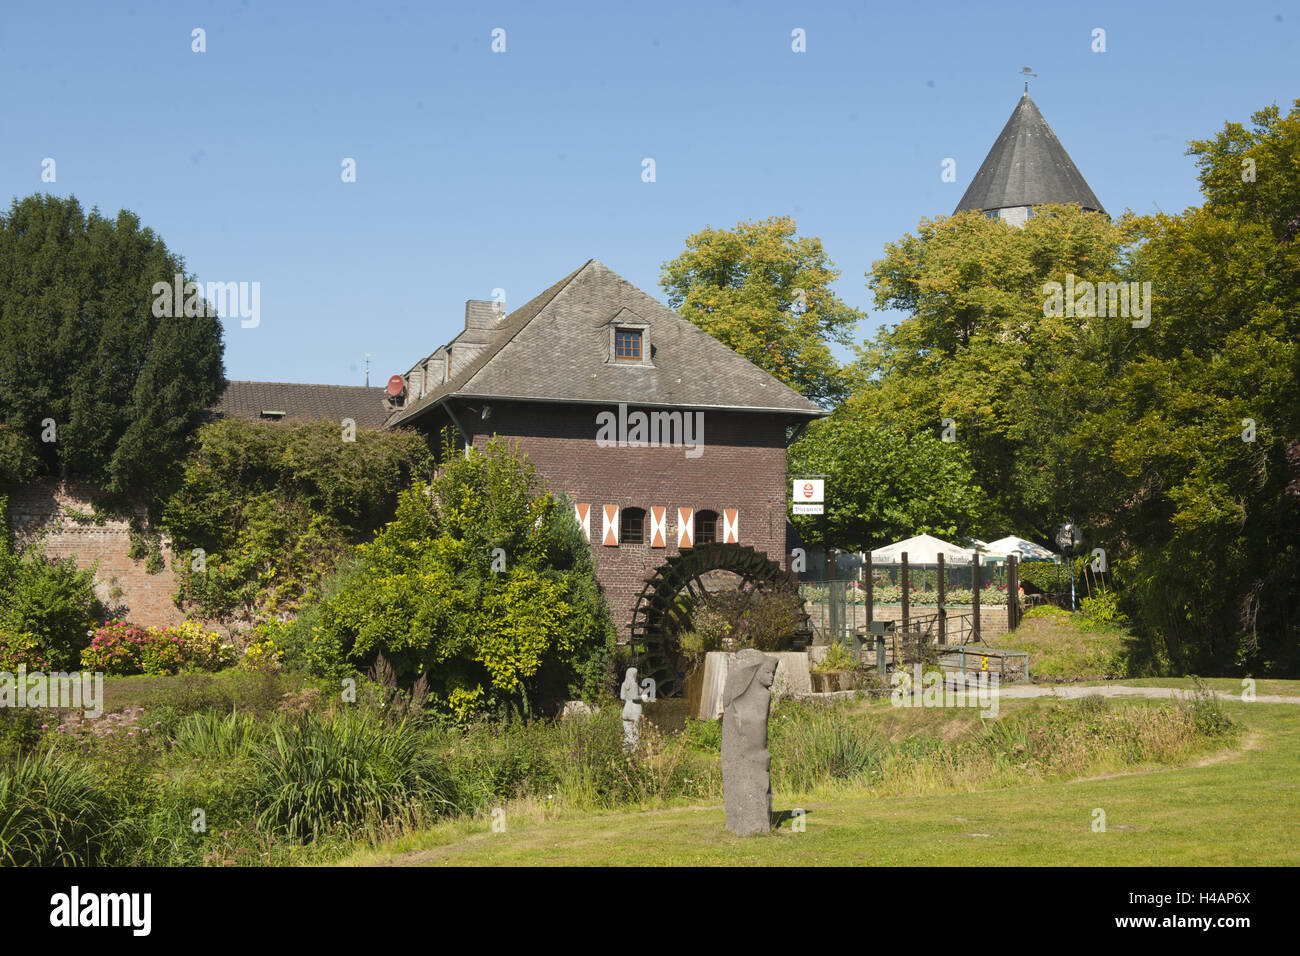 Germany, North Rhine-Westphalia, circle of Viersen, Brüggen, mill and castle, Stock Photo